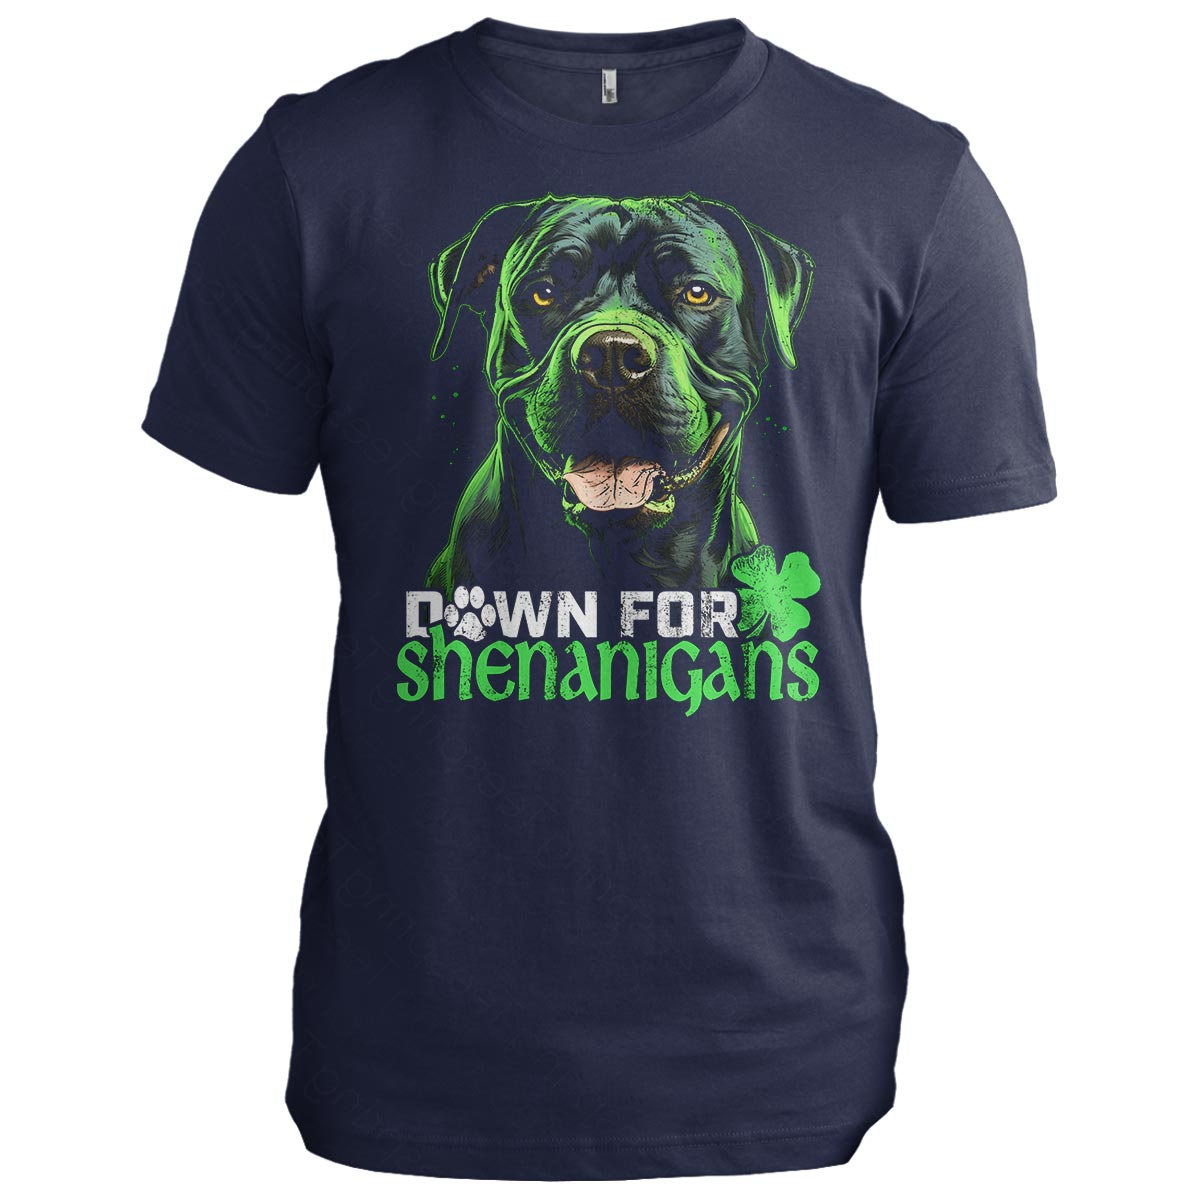 Down for Shenanigans: Cane Corso